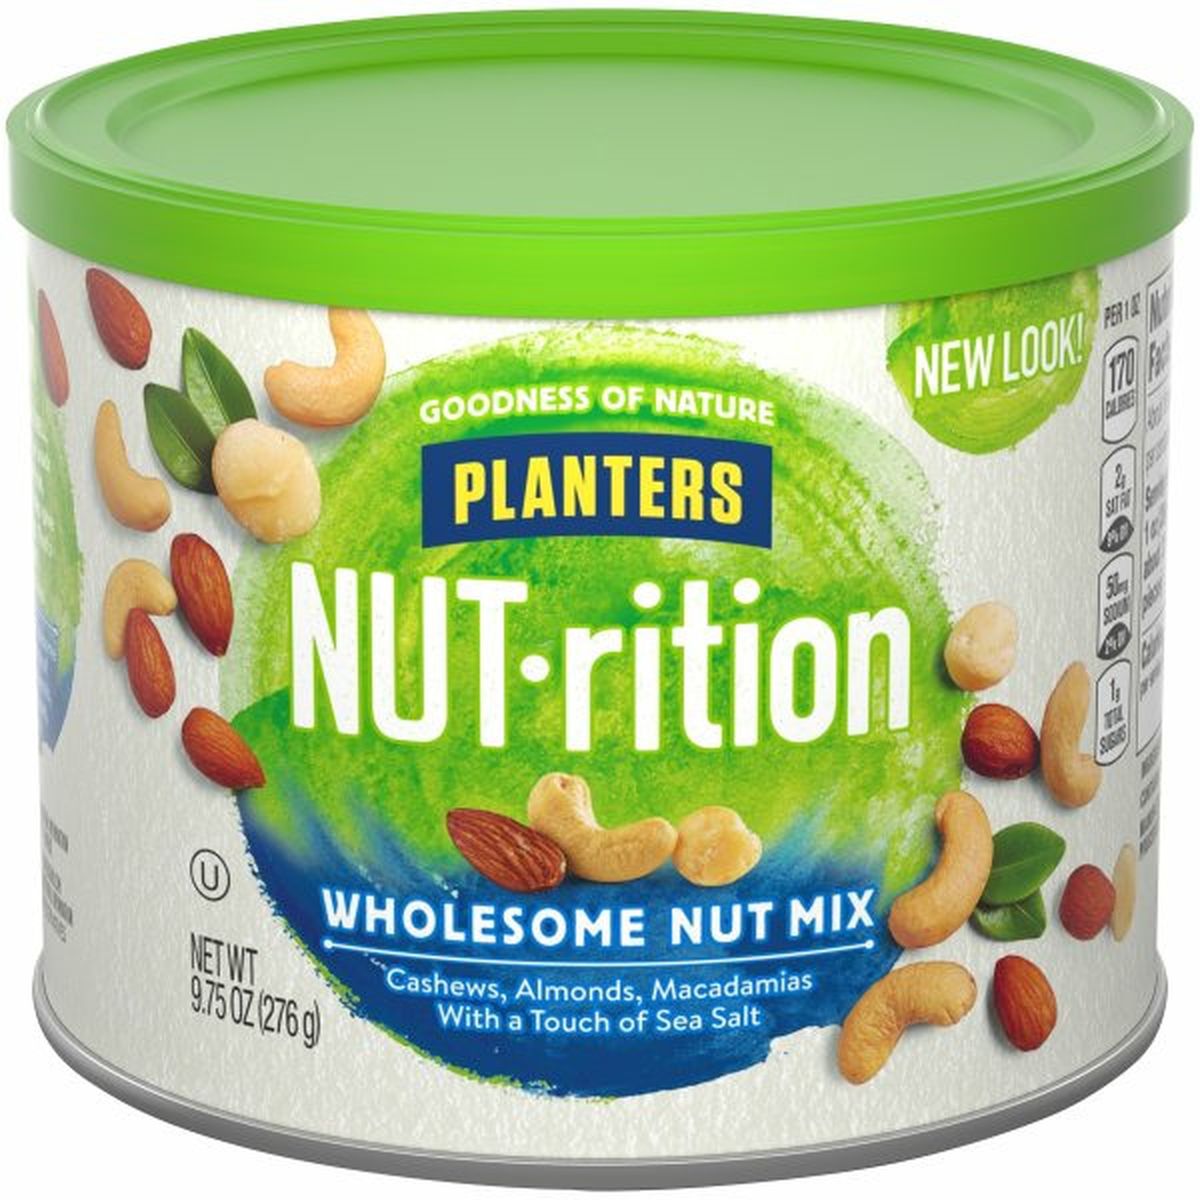 Calories in Planters Nut-rition NUT-rition Wholesome Nut Mix